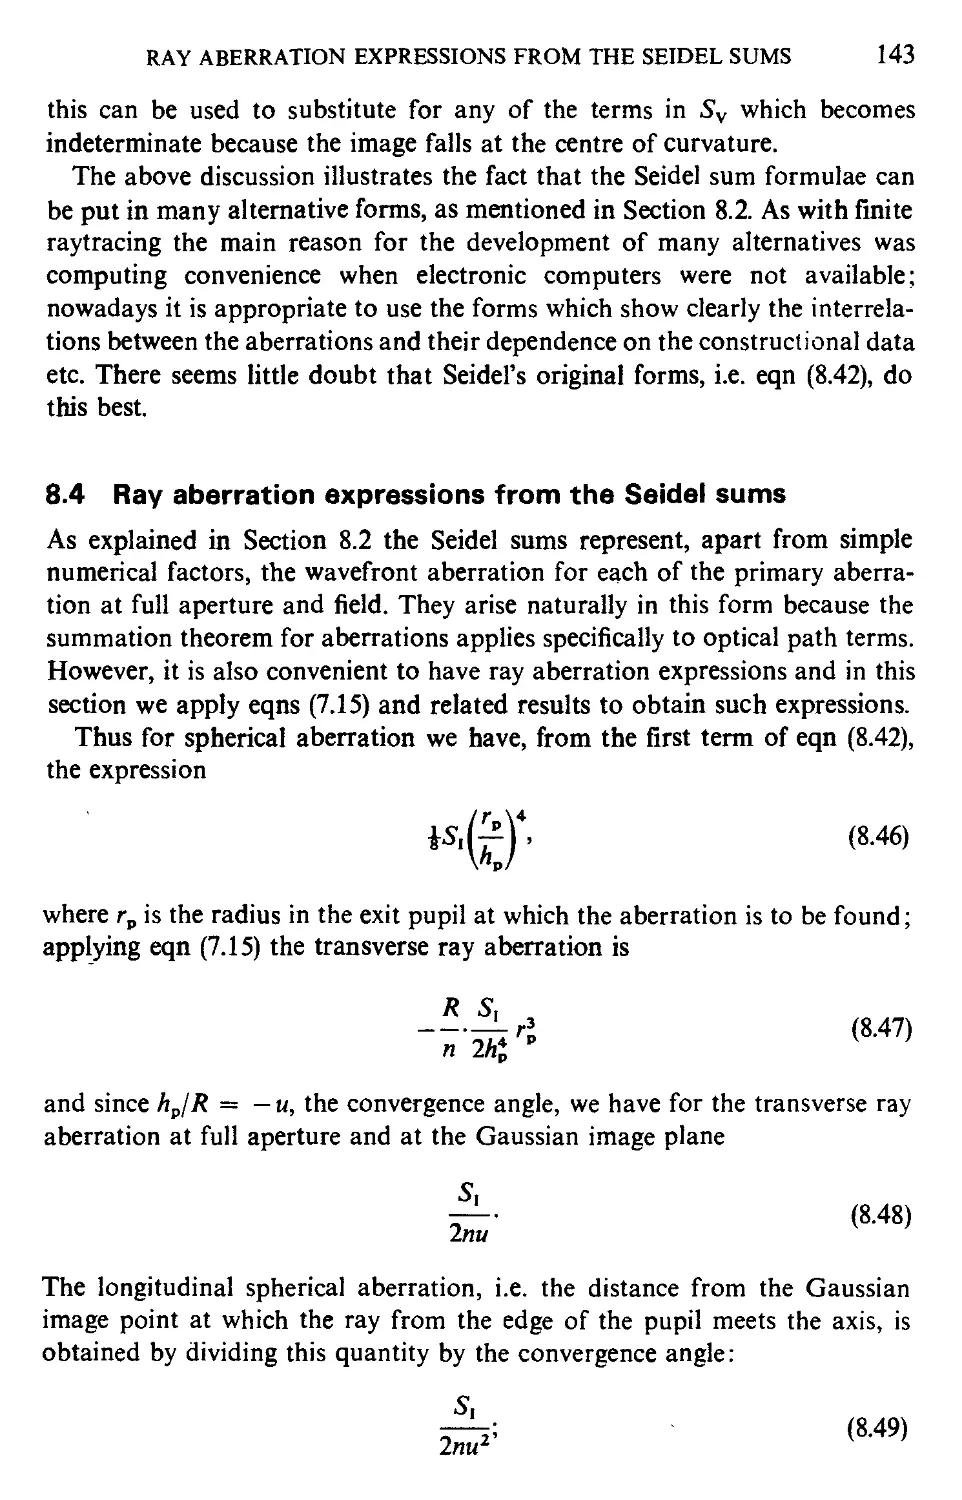 8.4 Ray aberration expressions for the Seidel sums